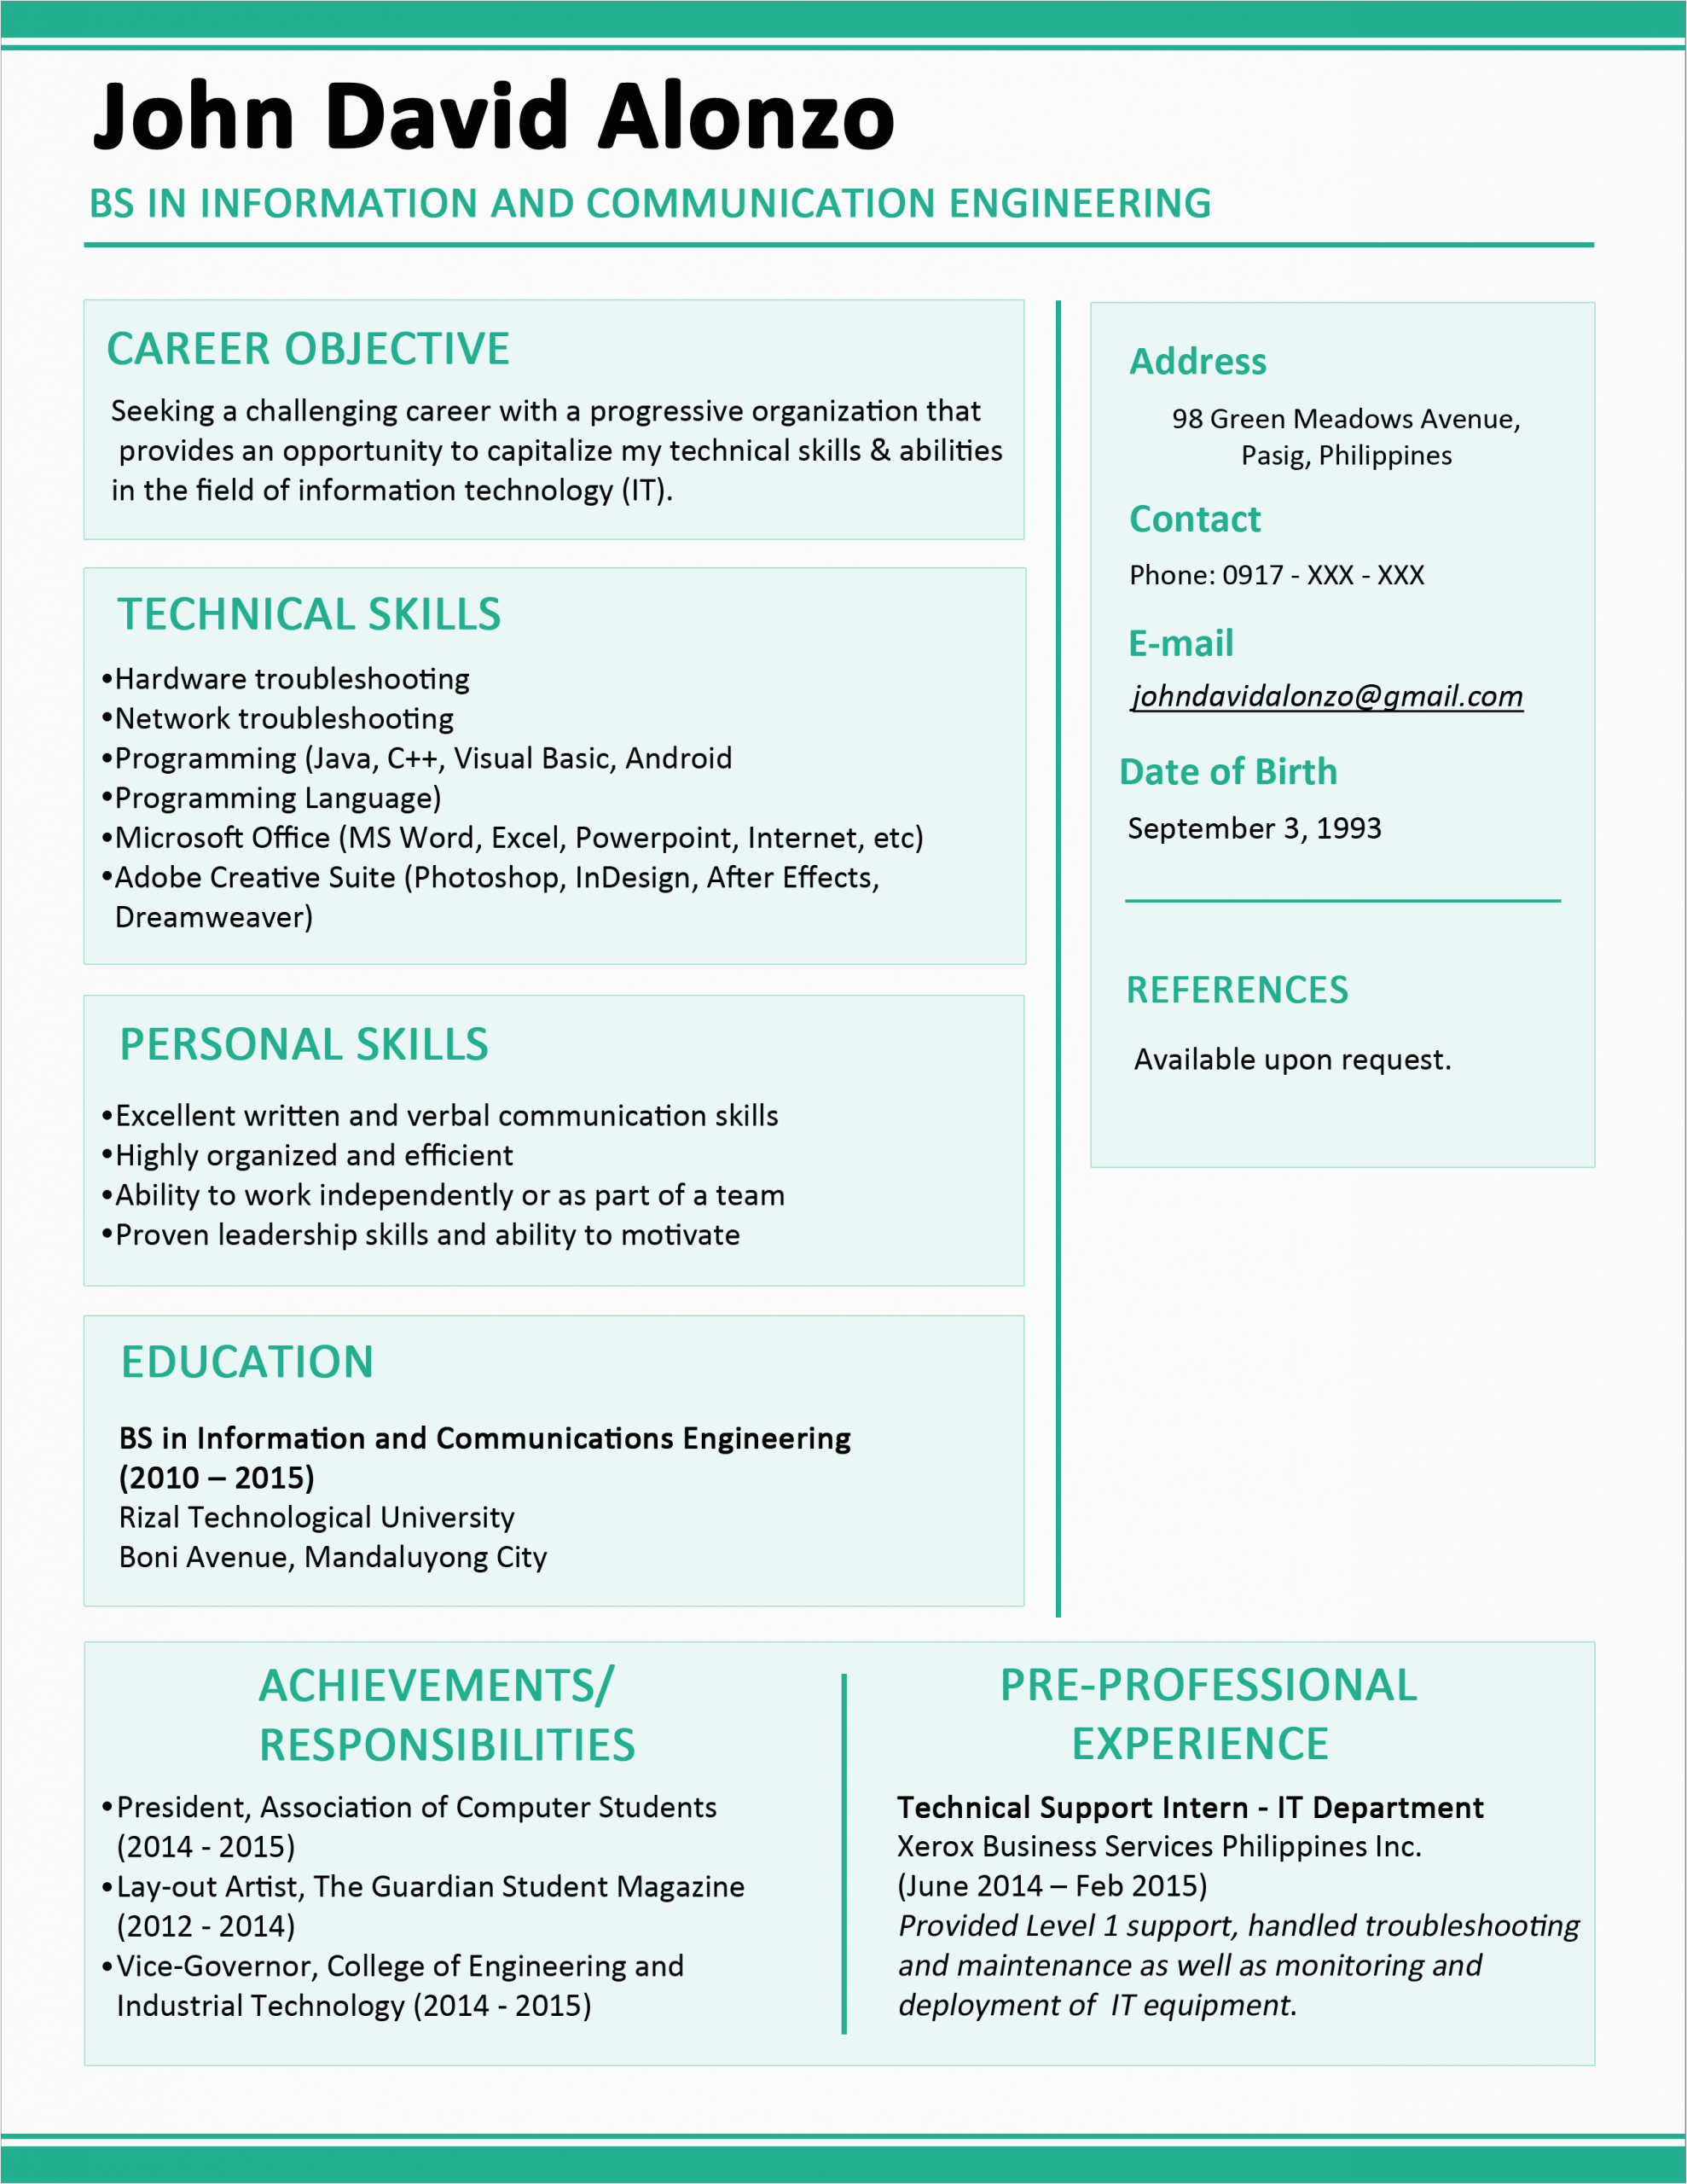 Chronological Resume Sample for Fresh Graduate 30 Simple and Basic Resume Templates for All Jobseekers